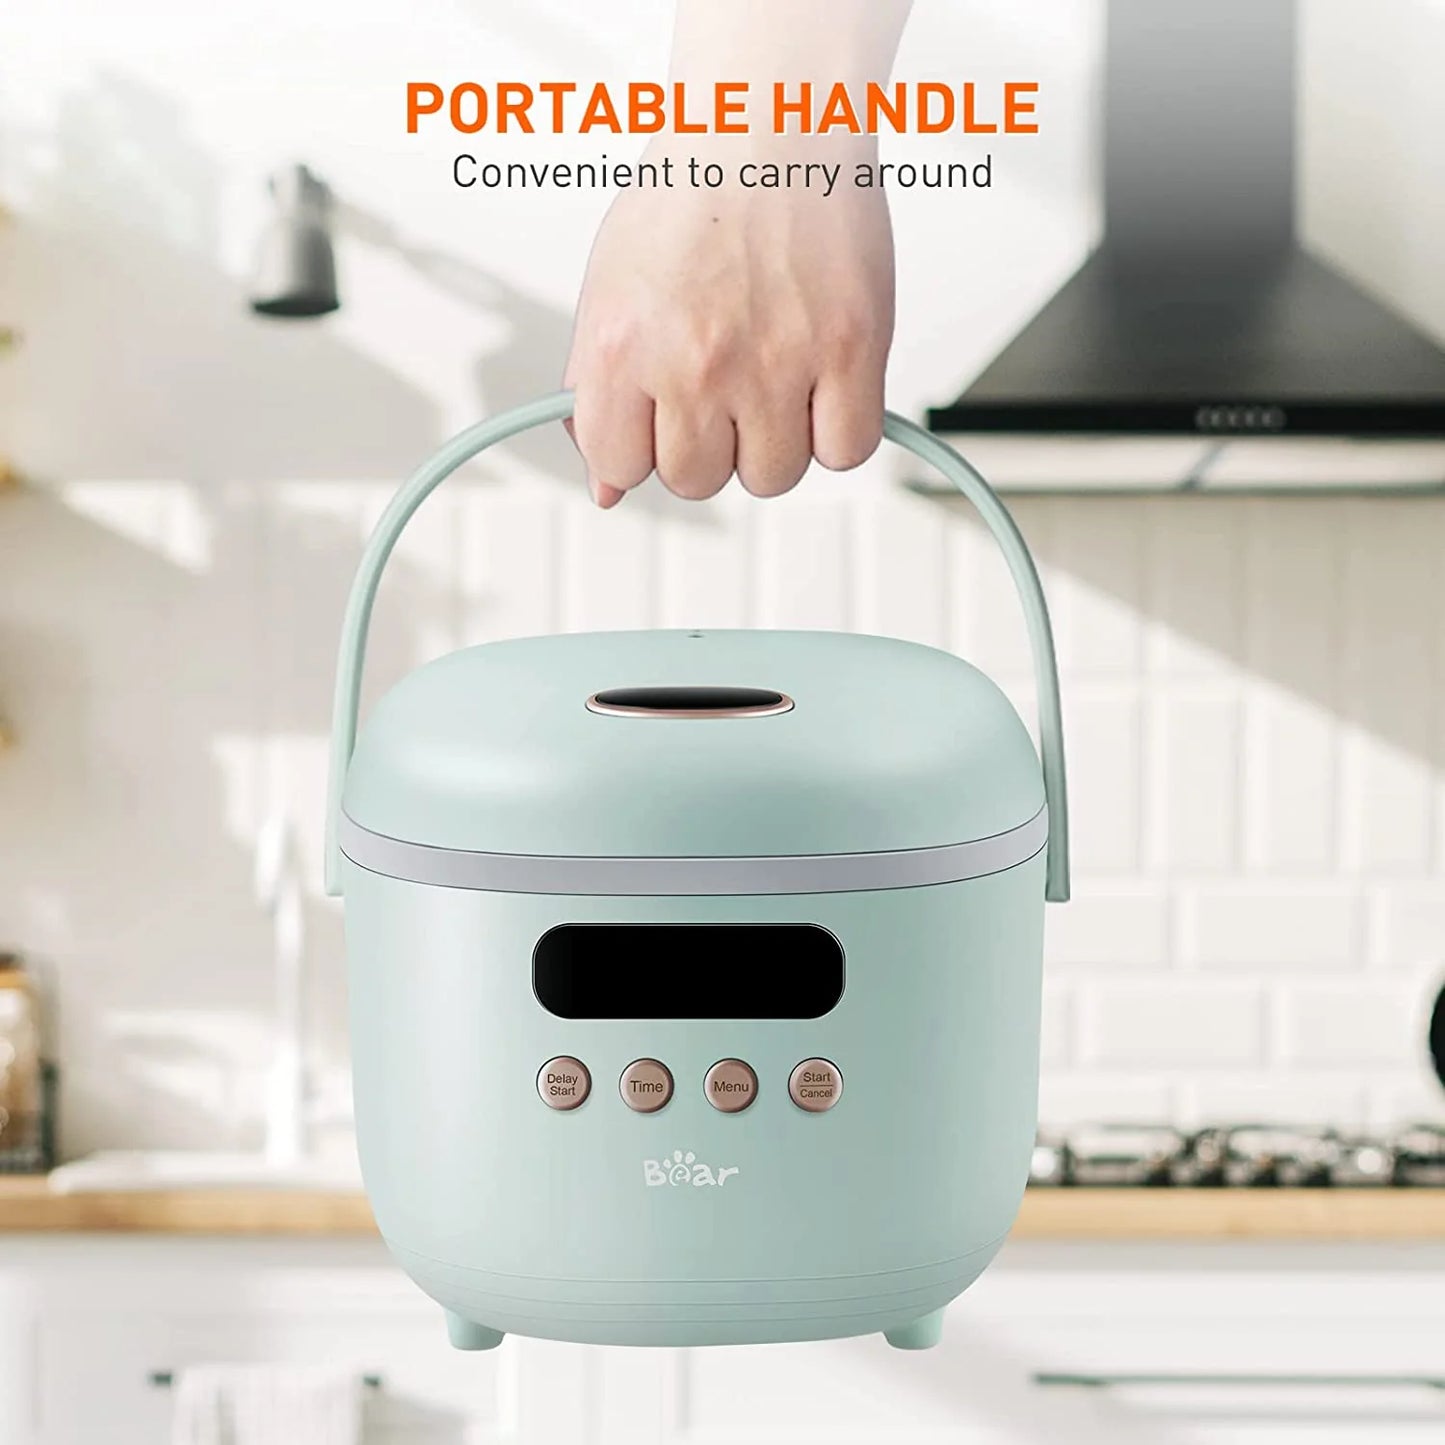 BEAR Rice Cooker DFB-B20K1 4 Cups Uncooked, 3L Digital Rice Maker with Portable Handle